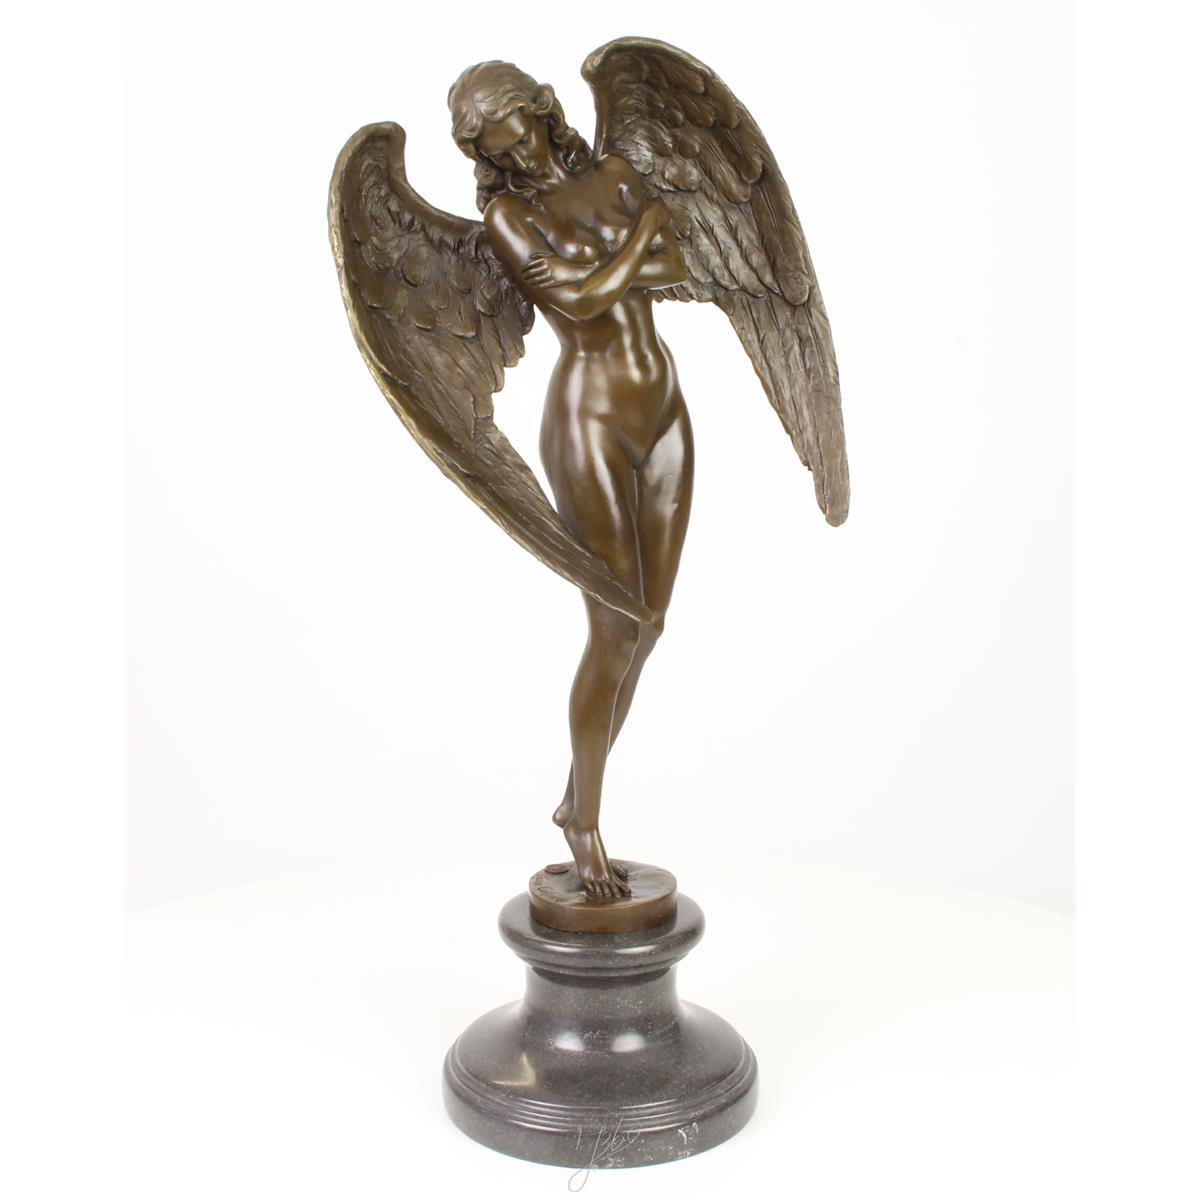 A BRONZE SCULPTURE OF THE WINGED NIGHT